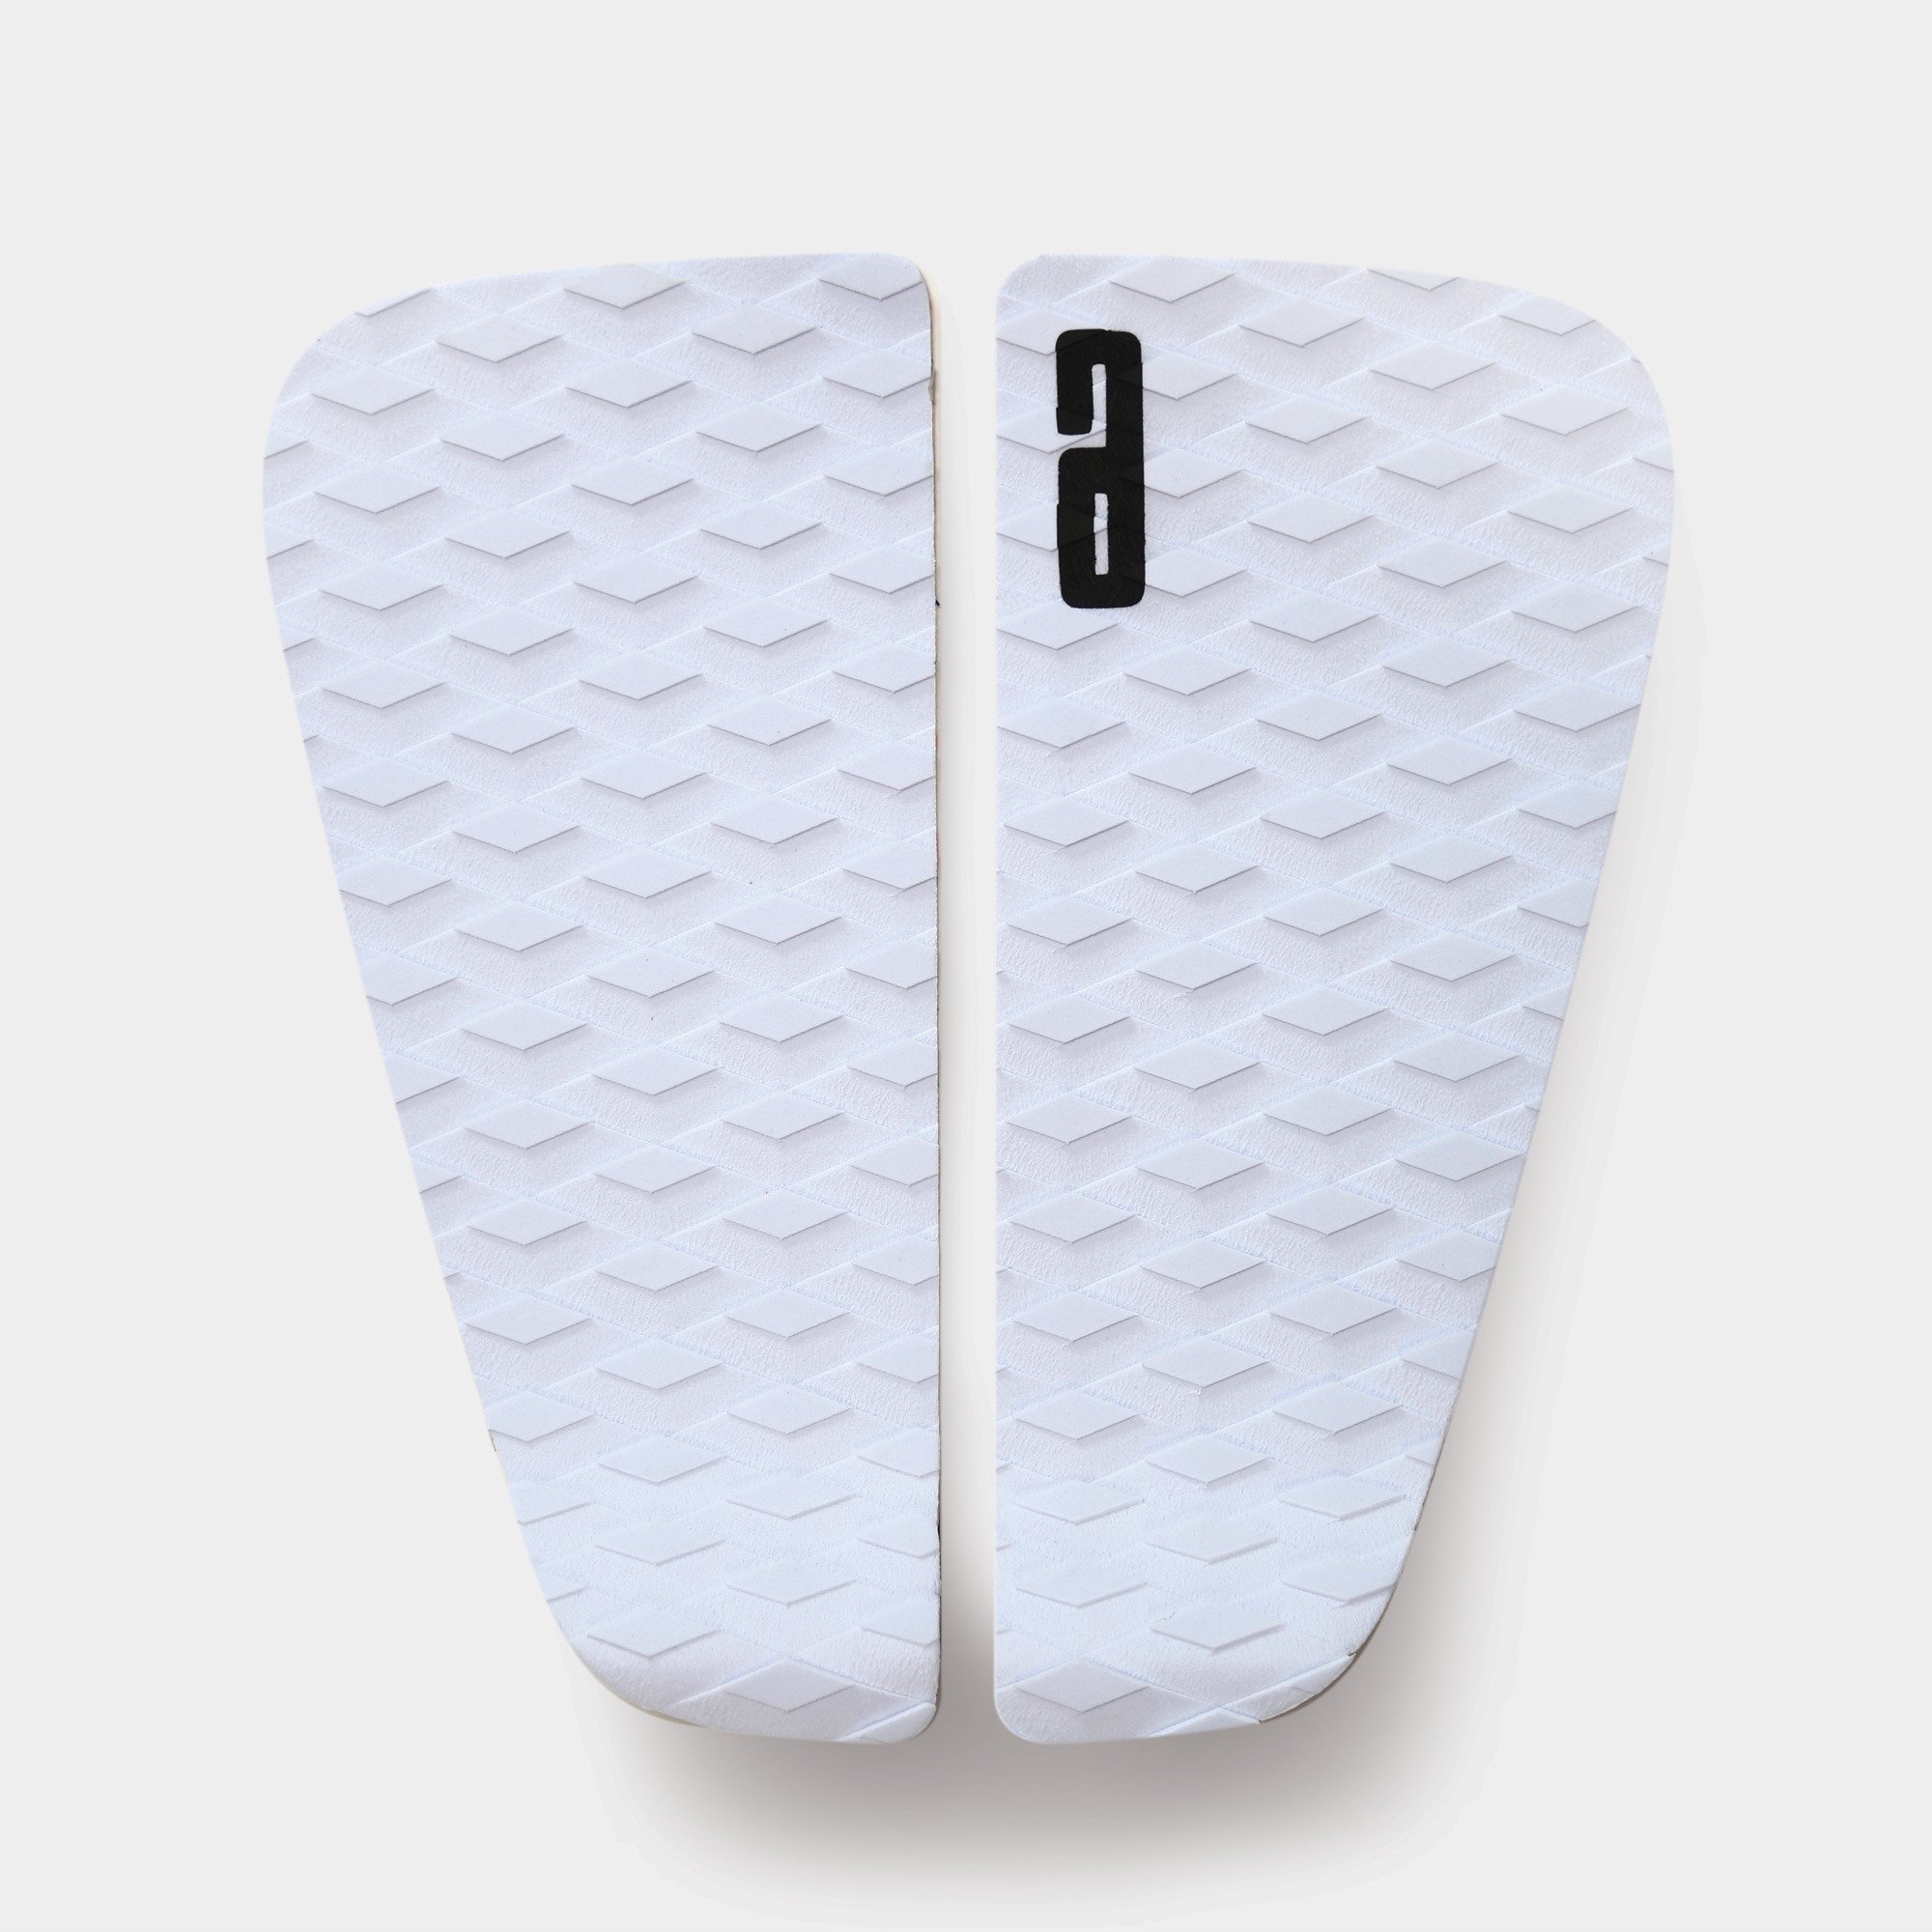 Awesome Colors Traction Pad